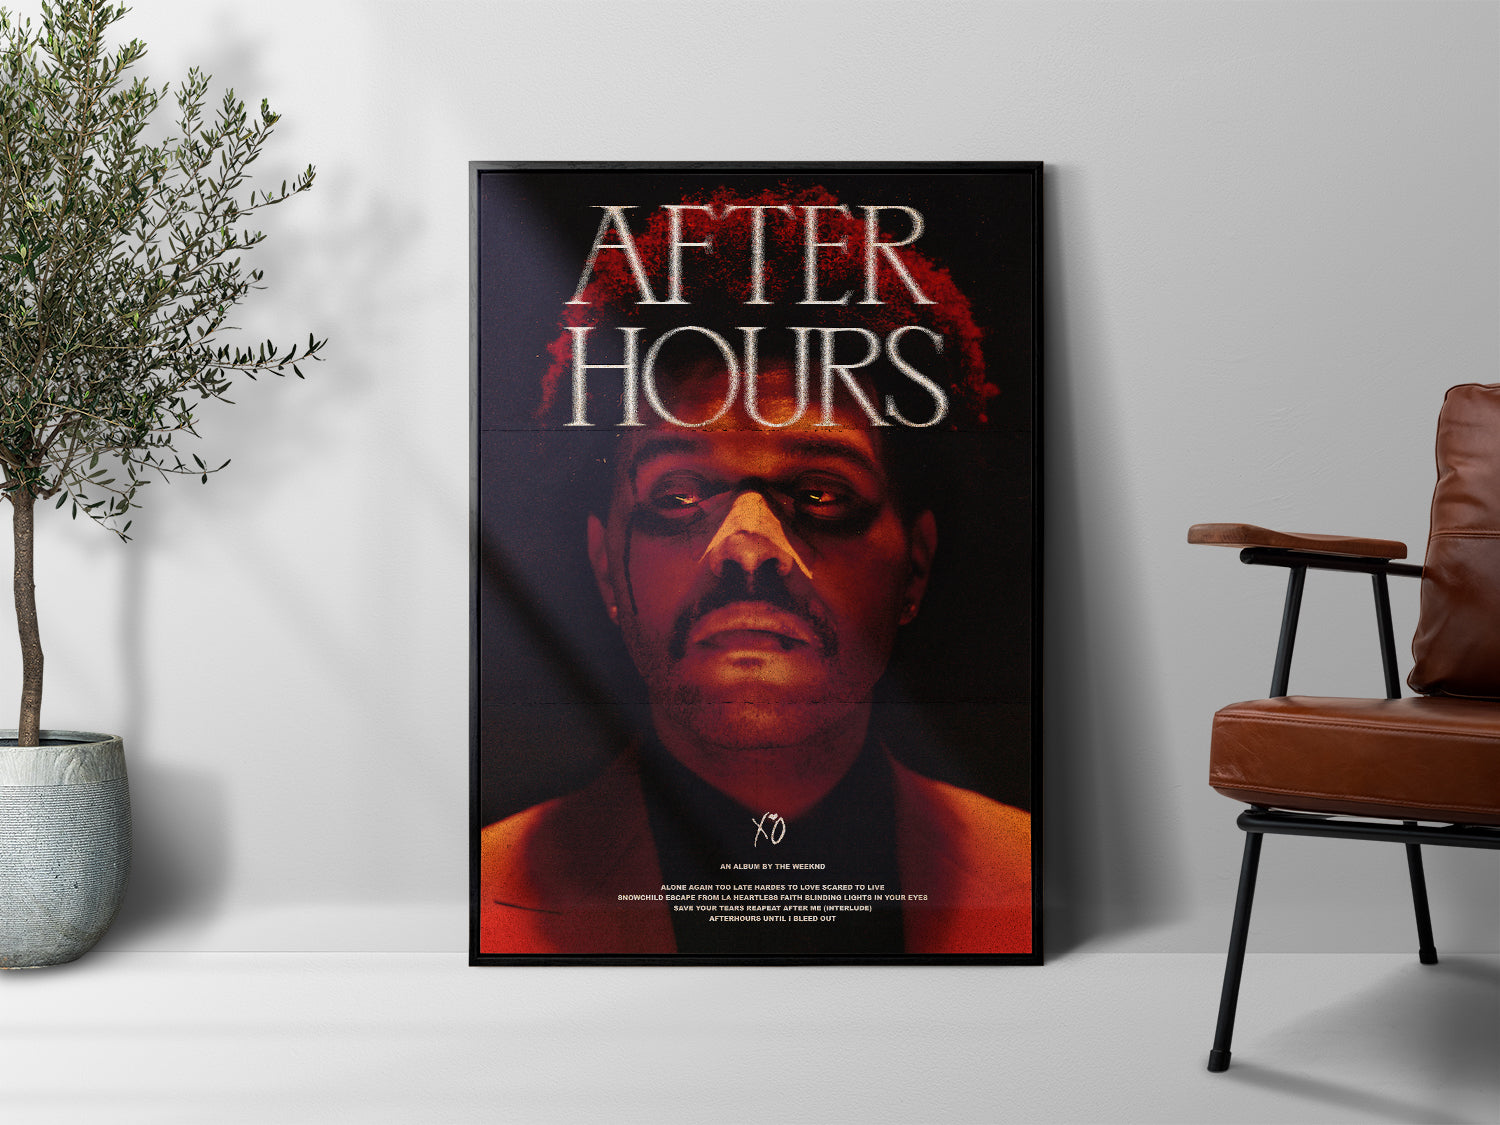 The Weeknd Poster, After Hours Album Poster, Music Poster, Gift